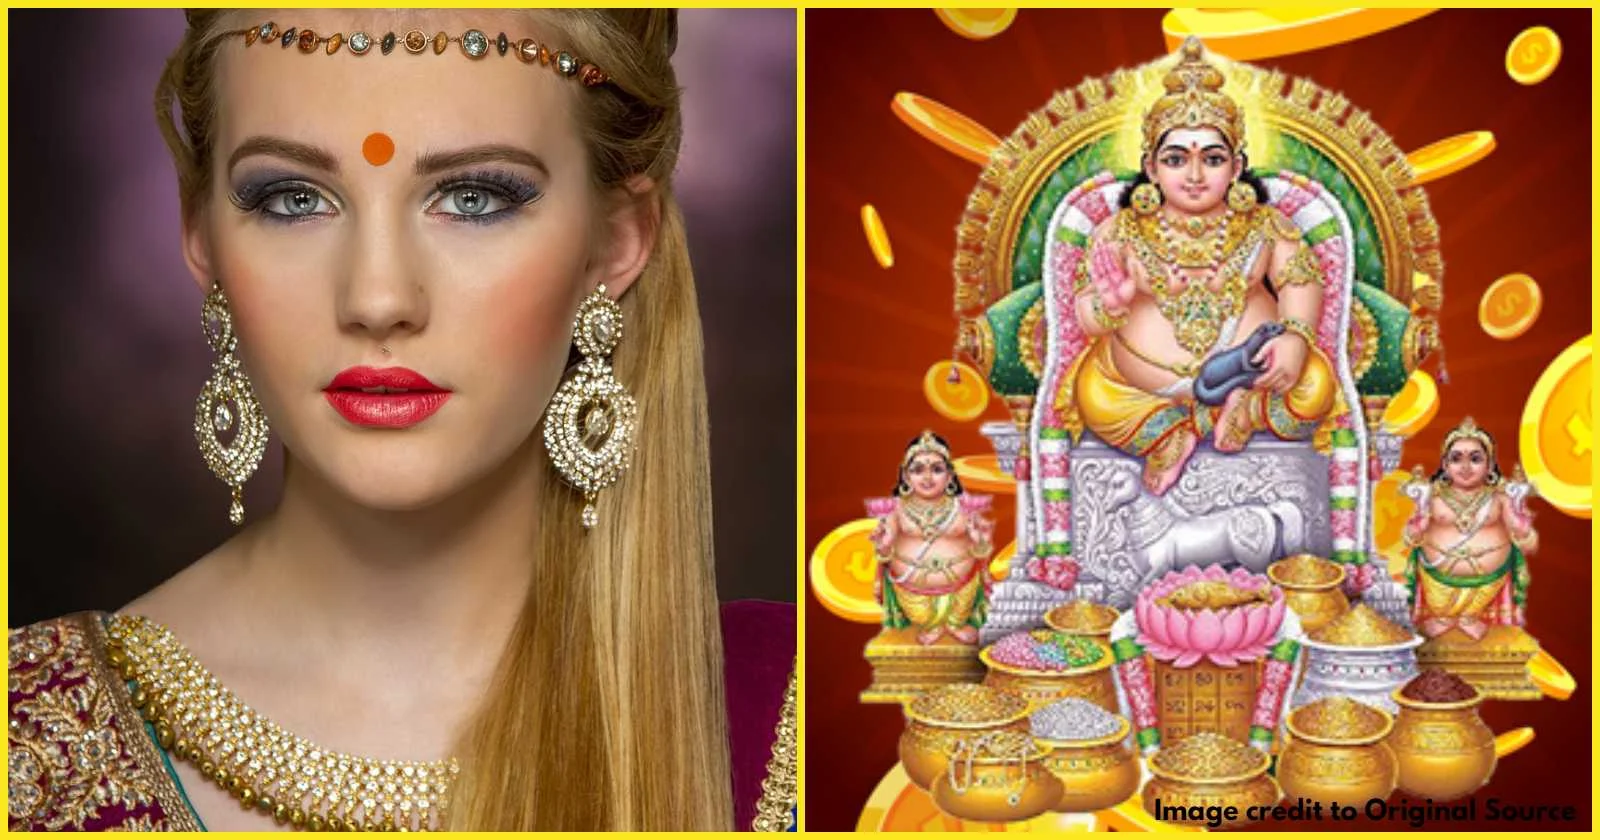 Kannada Horoscope predictions about Shobana Yoga- these zodiac signs will get benefit.